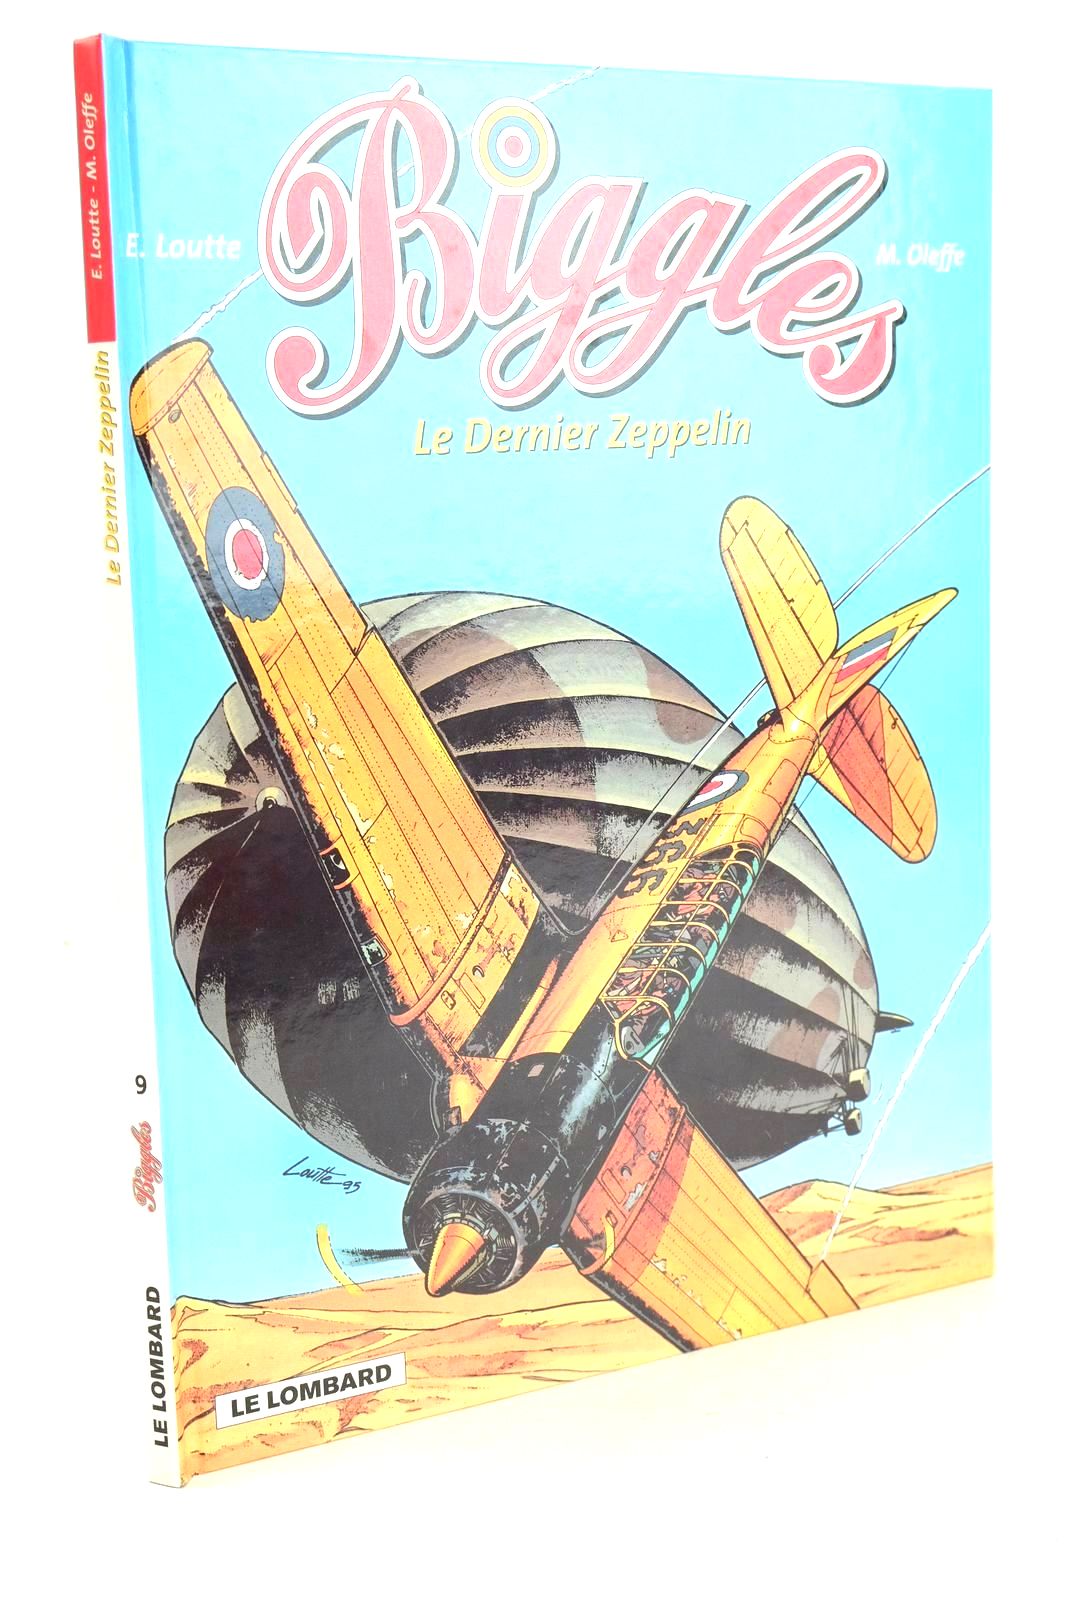 Photo of BIGGLES DETECTIVE DE L'AIR... LE DERNIER ZEPPELIN written by Johns, W.E. Oleffe, Michel illustrated by Loutte, Eric Bergese, Frederic published by Editions Du Lombard (STOCK CODE: 1326327)  for sale by Stella & Rose's Books